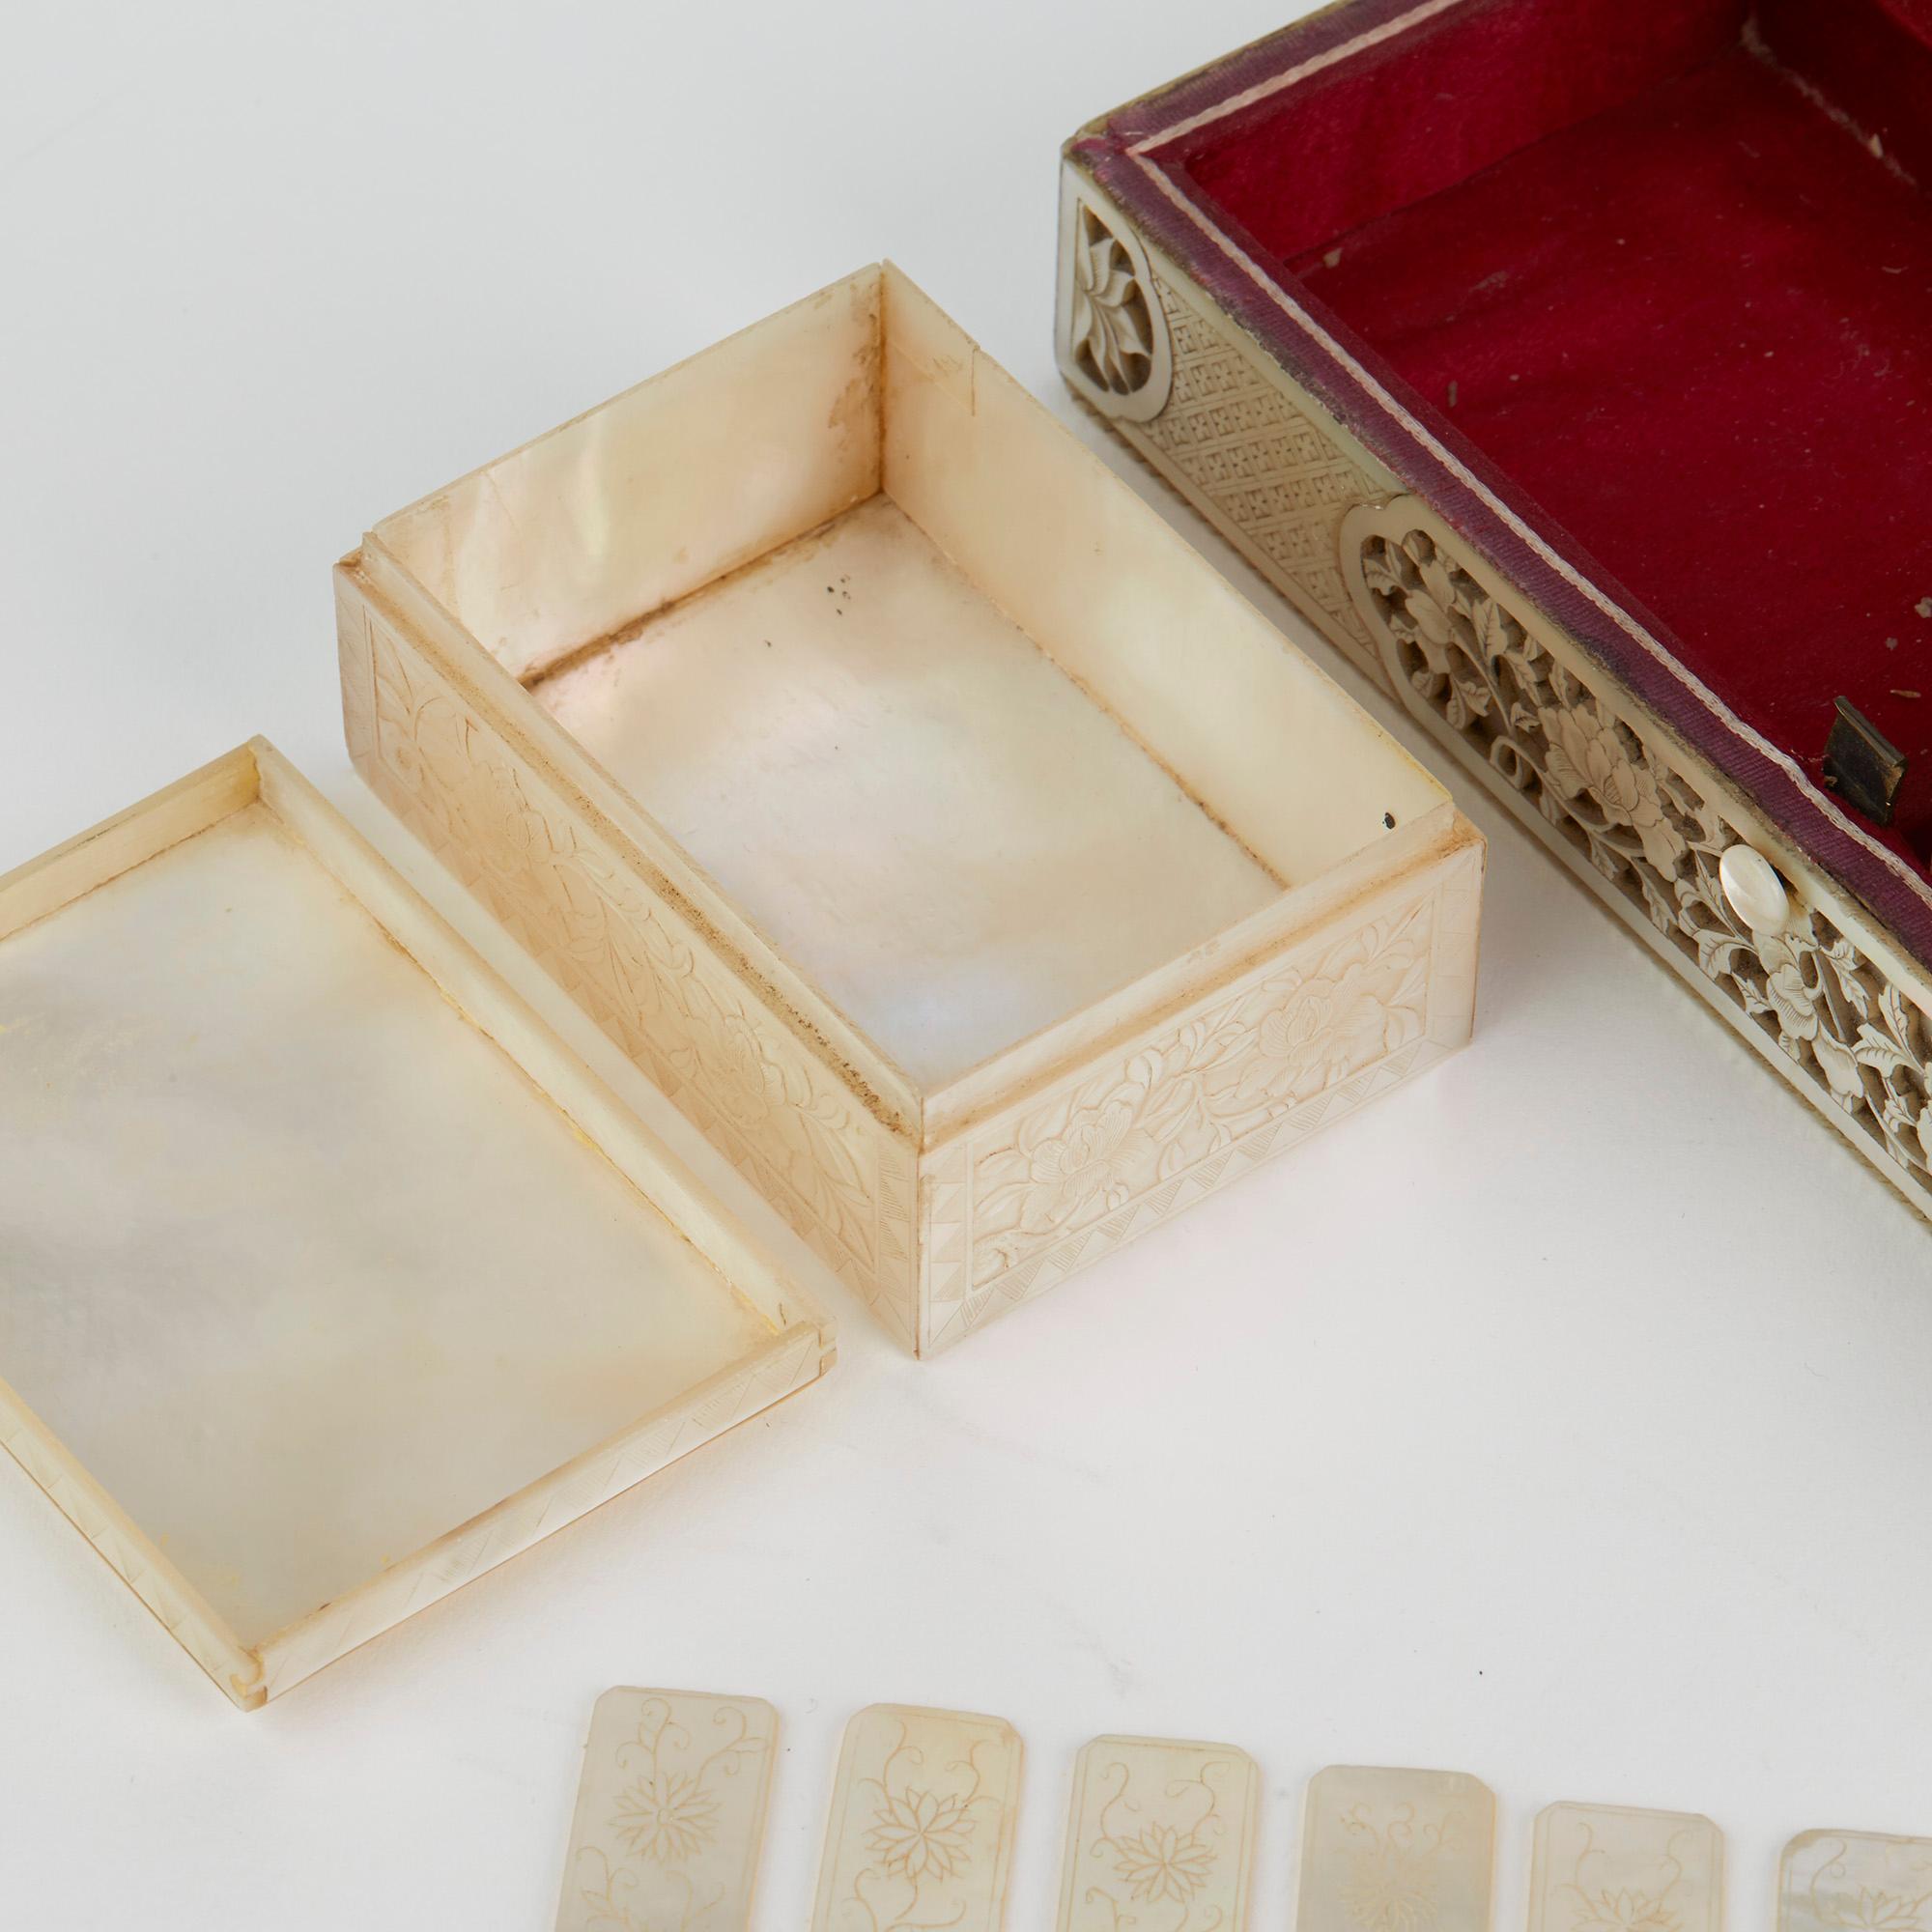 An exceptional and rare Chinese mother of pearl mounted games box with four matching interior boxes containing gaming counters and dating from the 18th century. The rectangular shaped box has a hinged cover, the wooden body mounted with deep carved